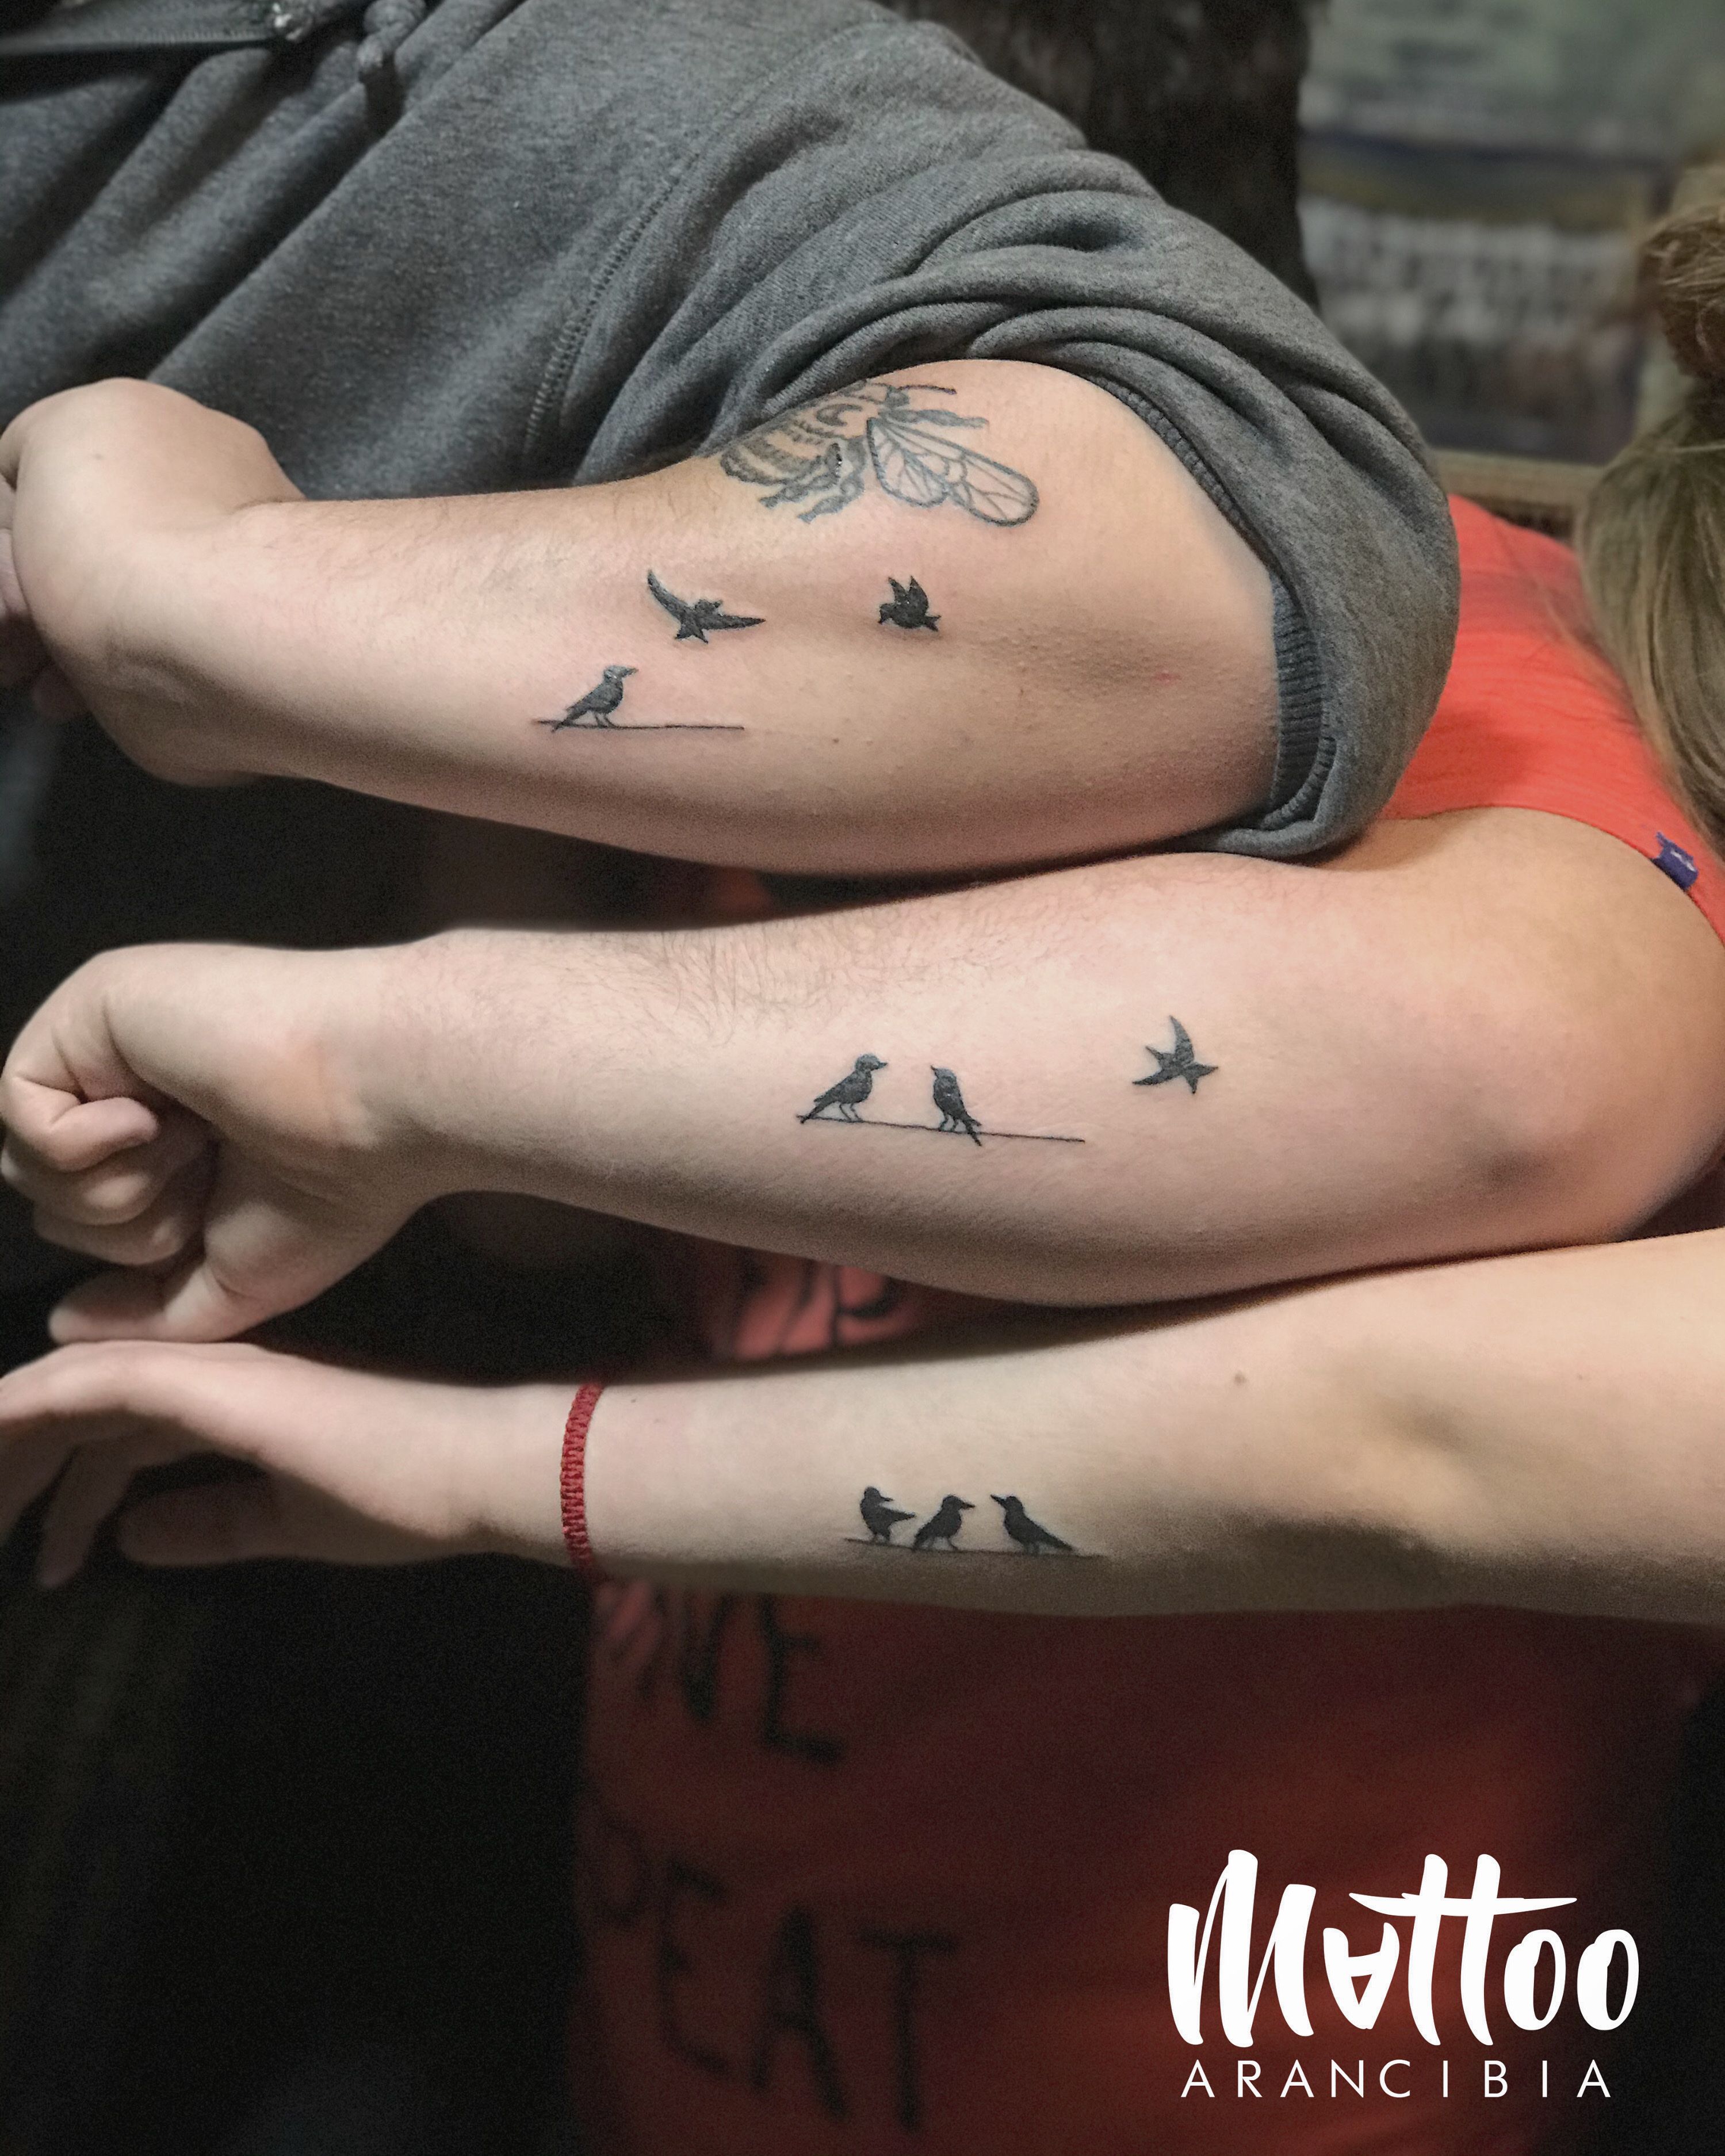 Best twin brother tattoos ever. : r/pics